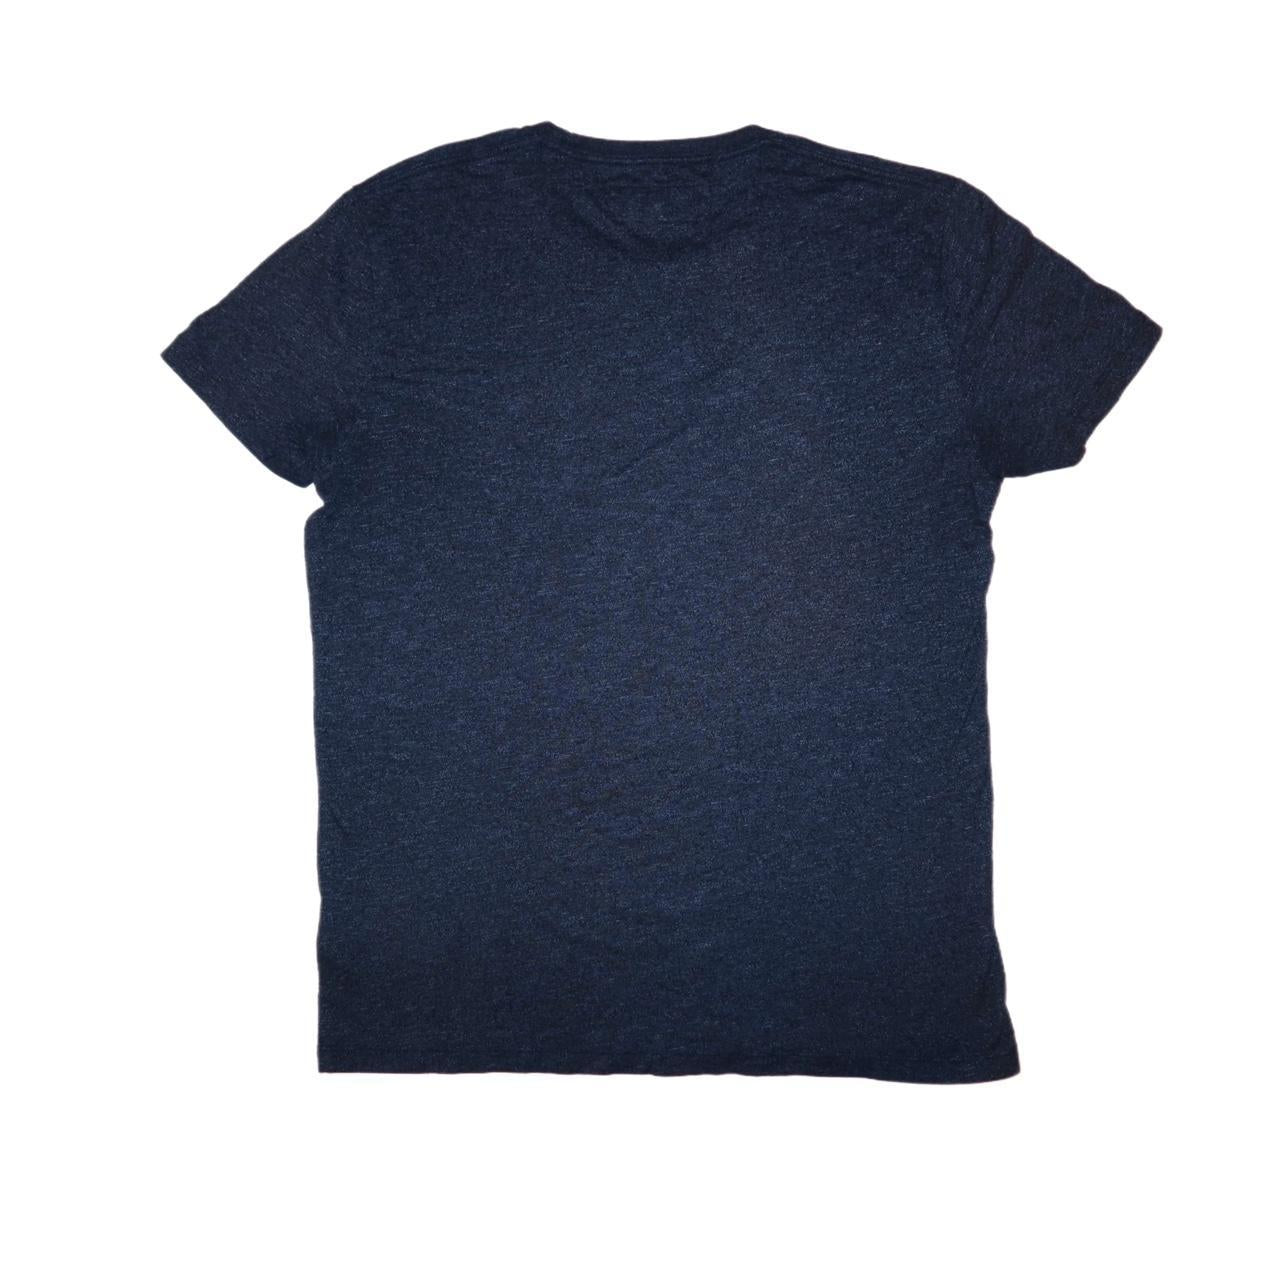 Abercrombie & Fitch Polo Navy Soft T-Shirt Men’s -Small